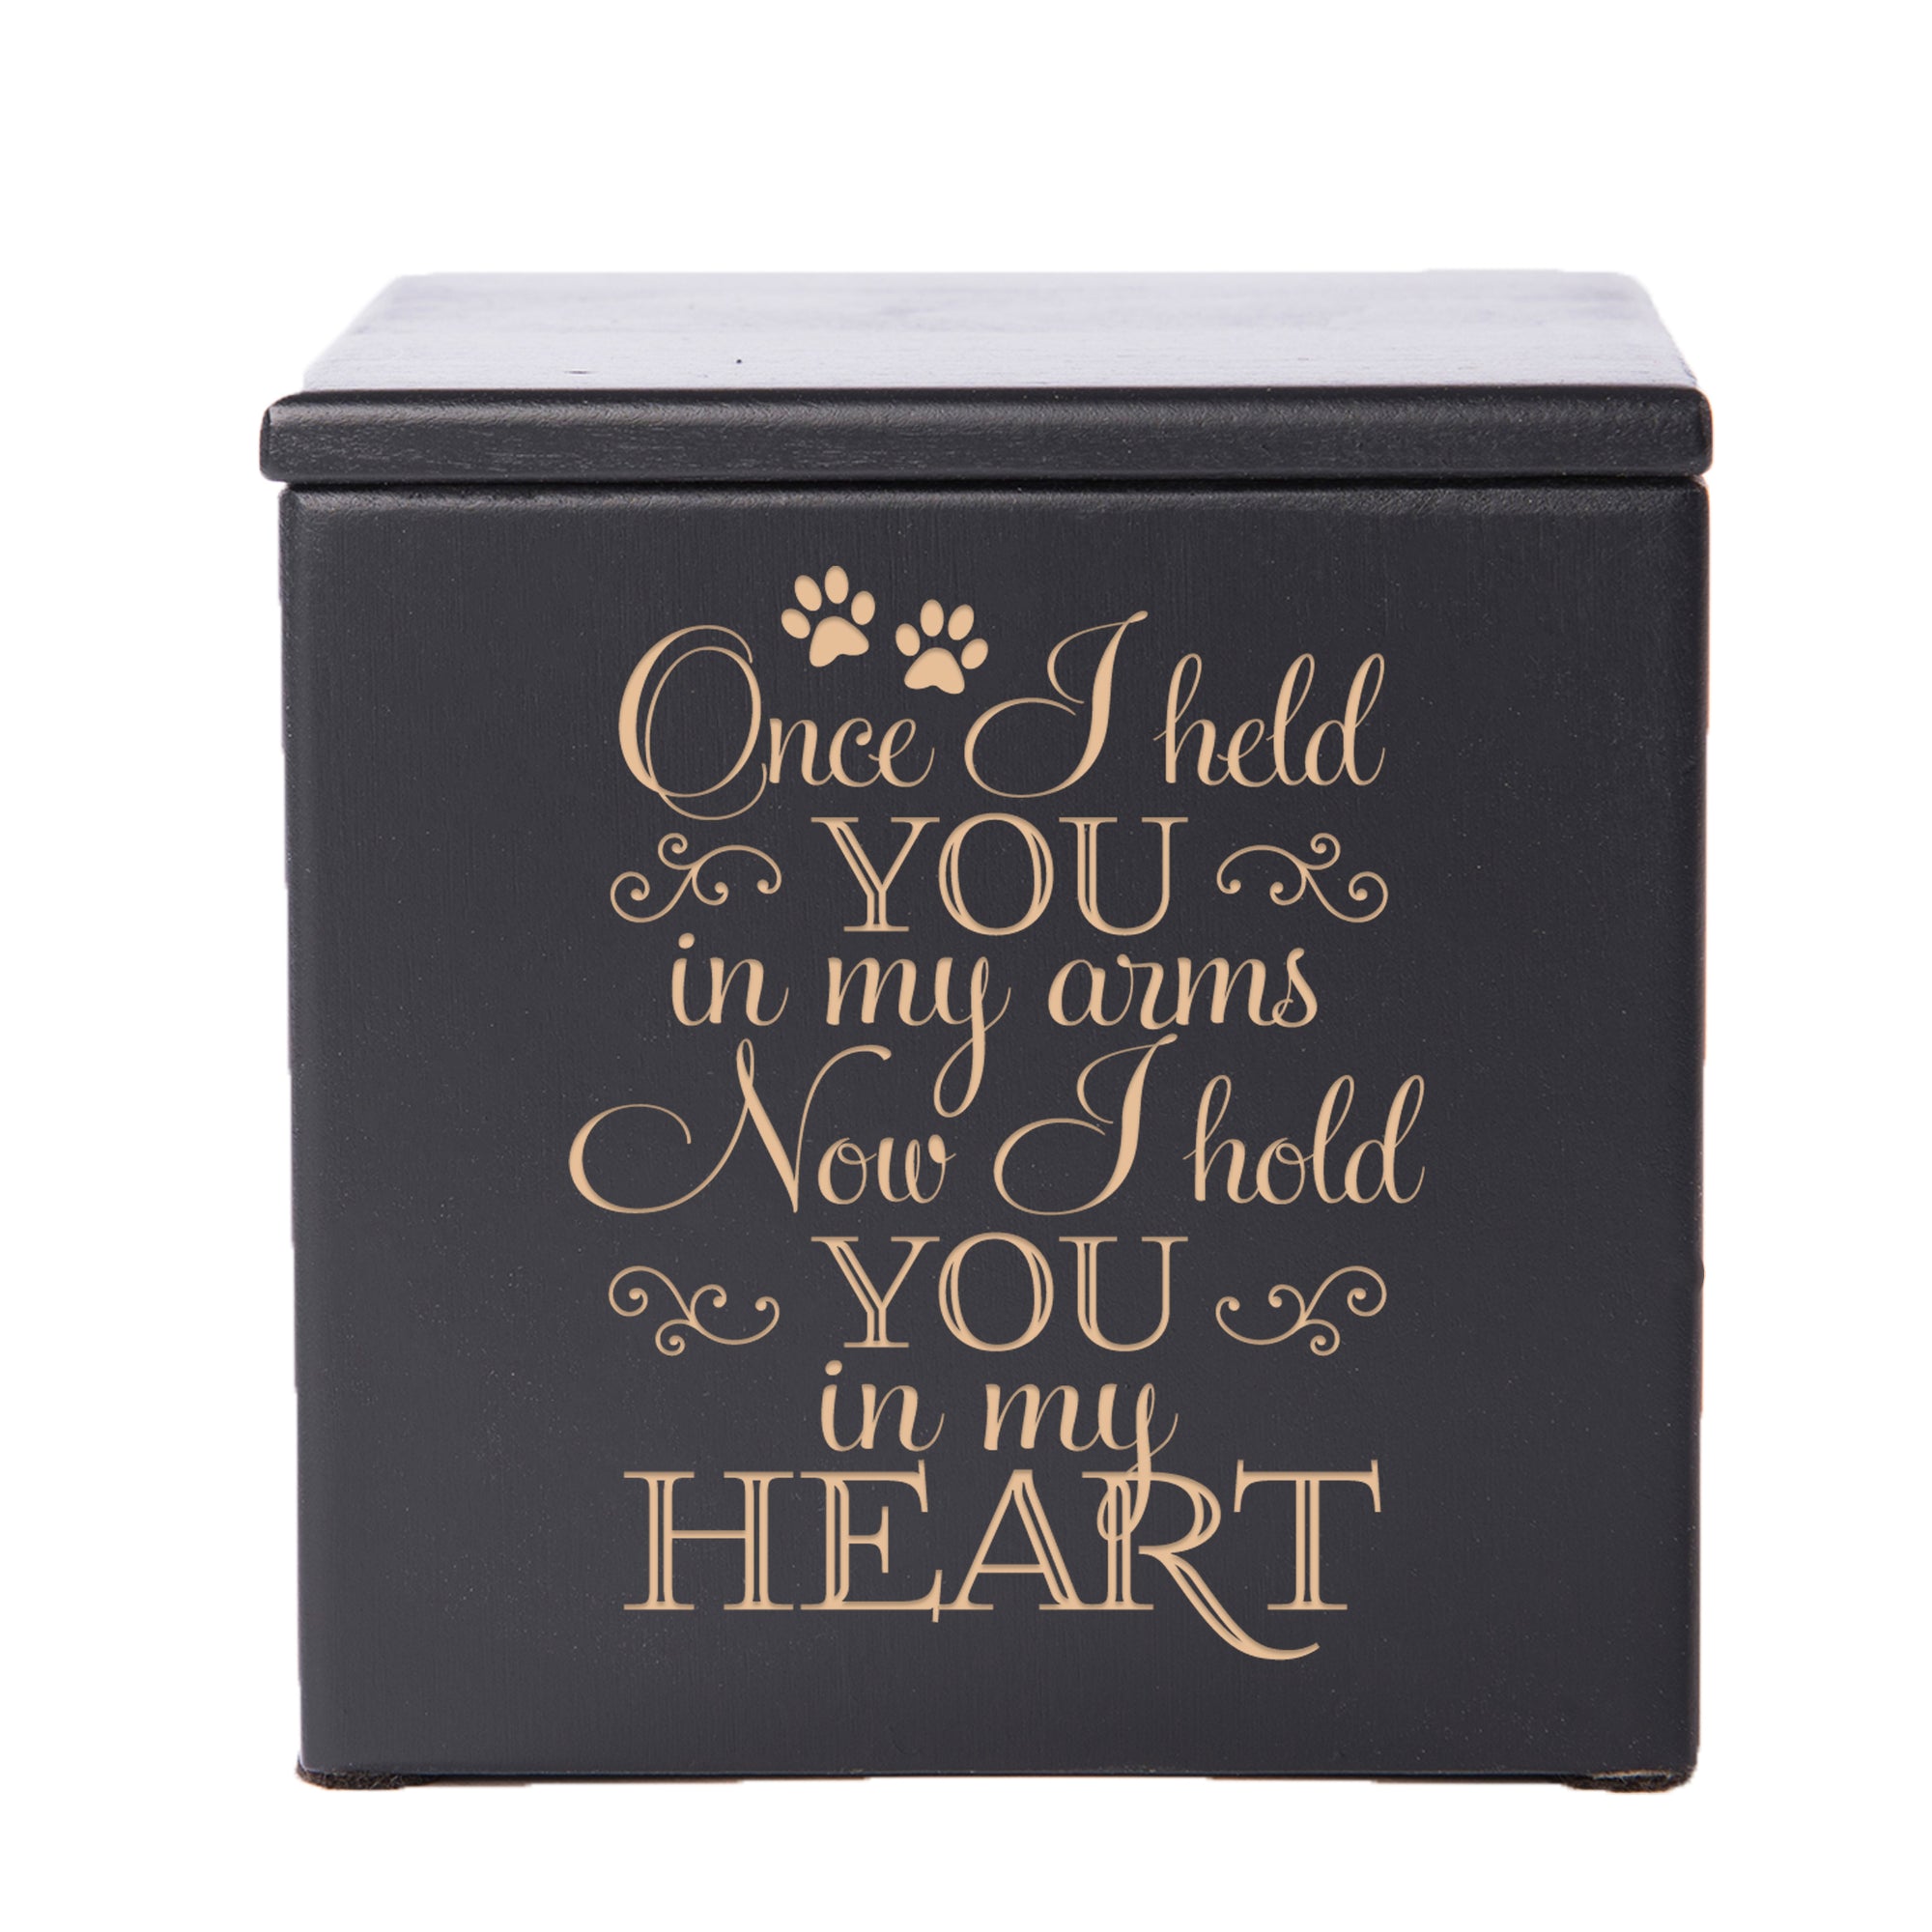 A wooden pet urn crafted with care, designed to hold your beloved pet's ashes.